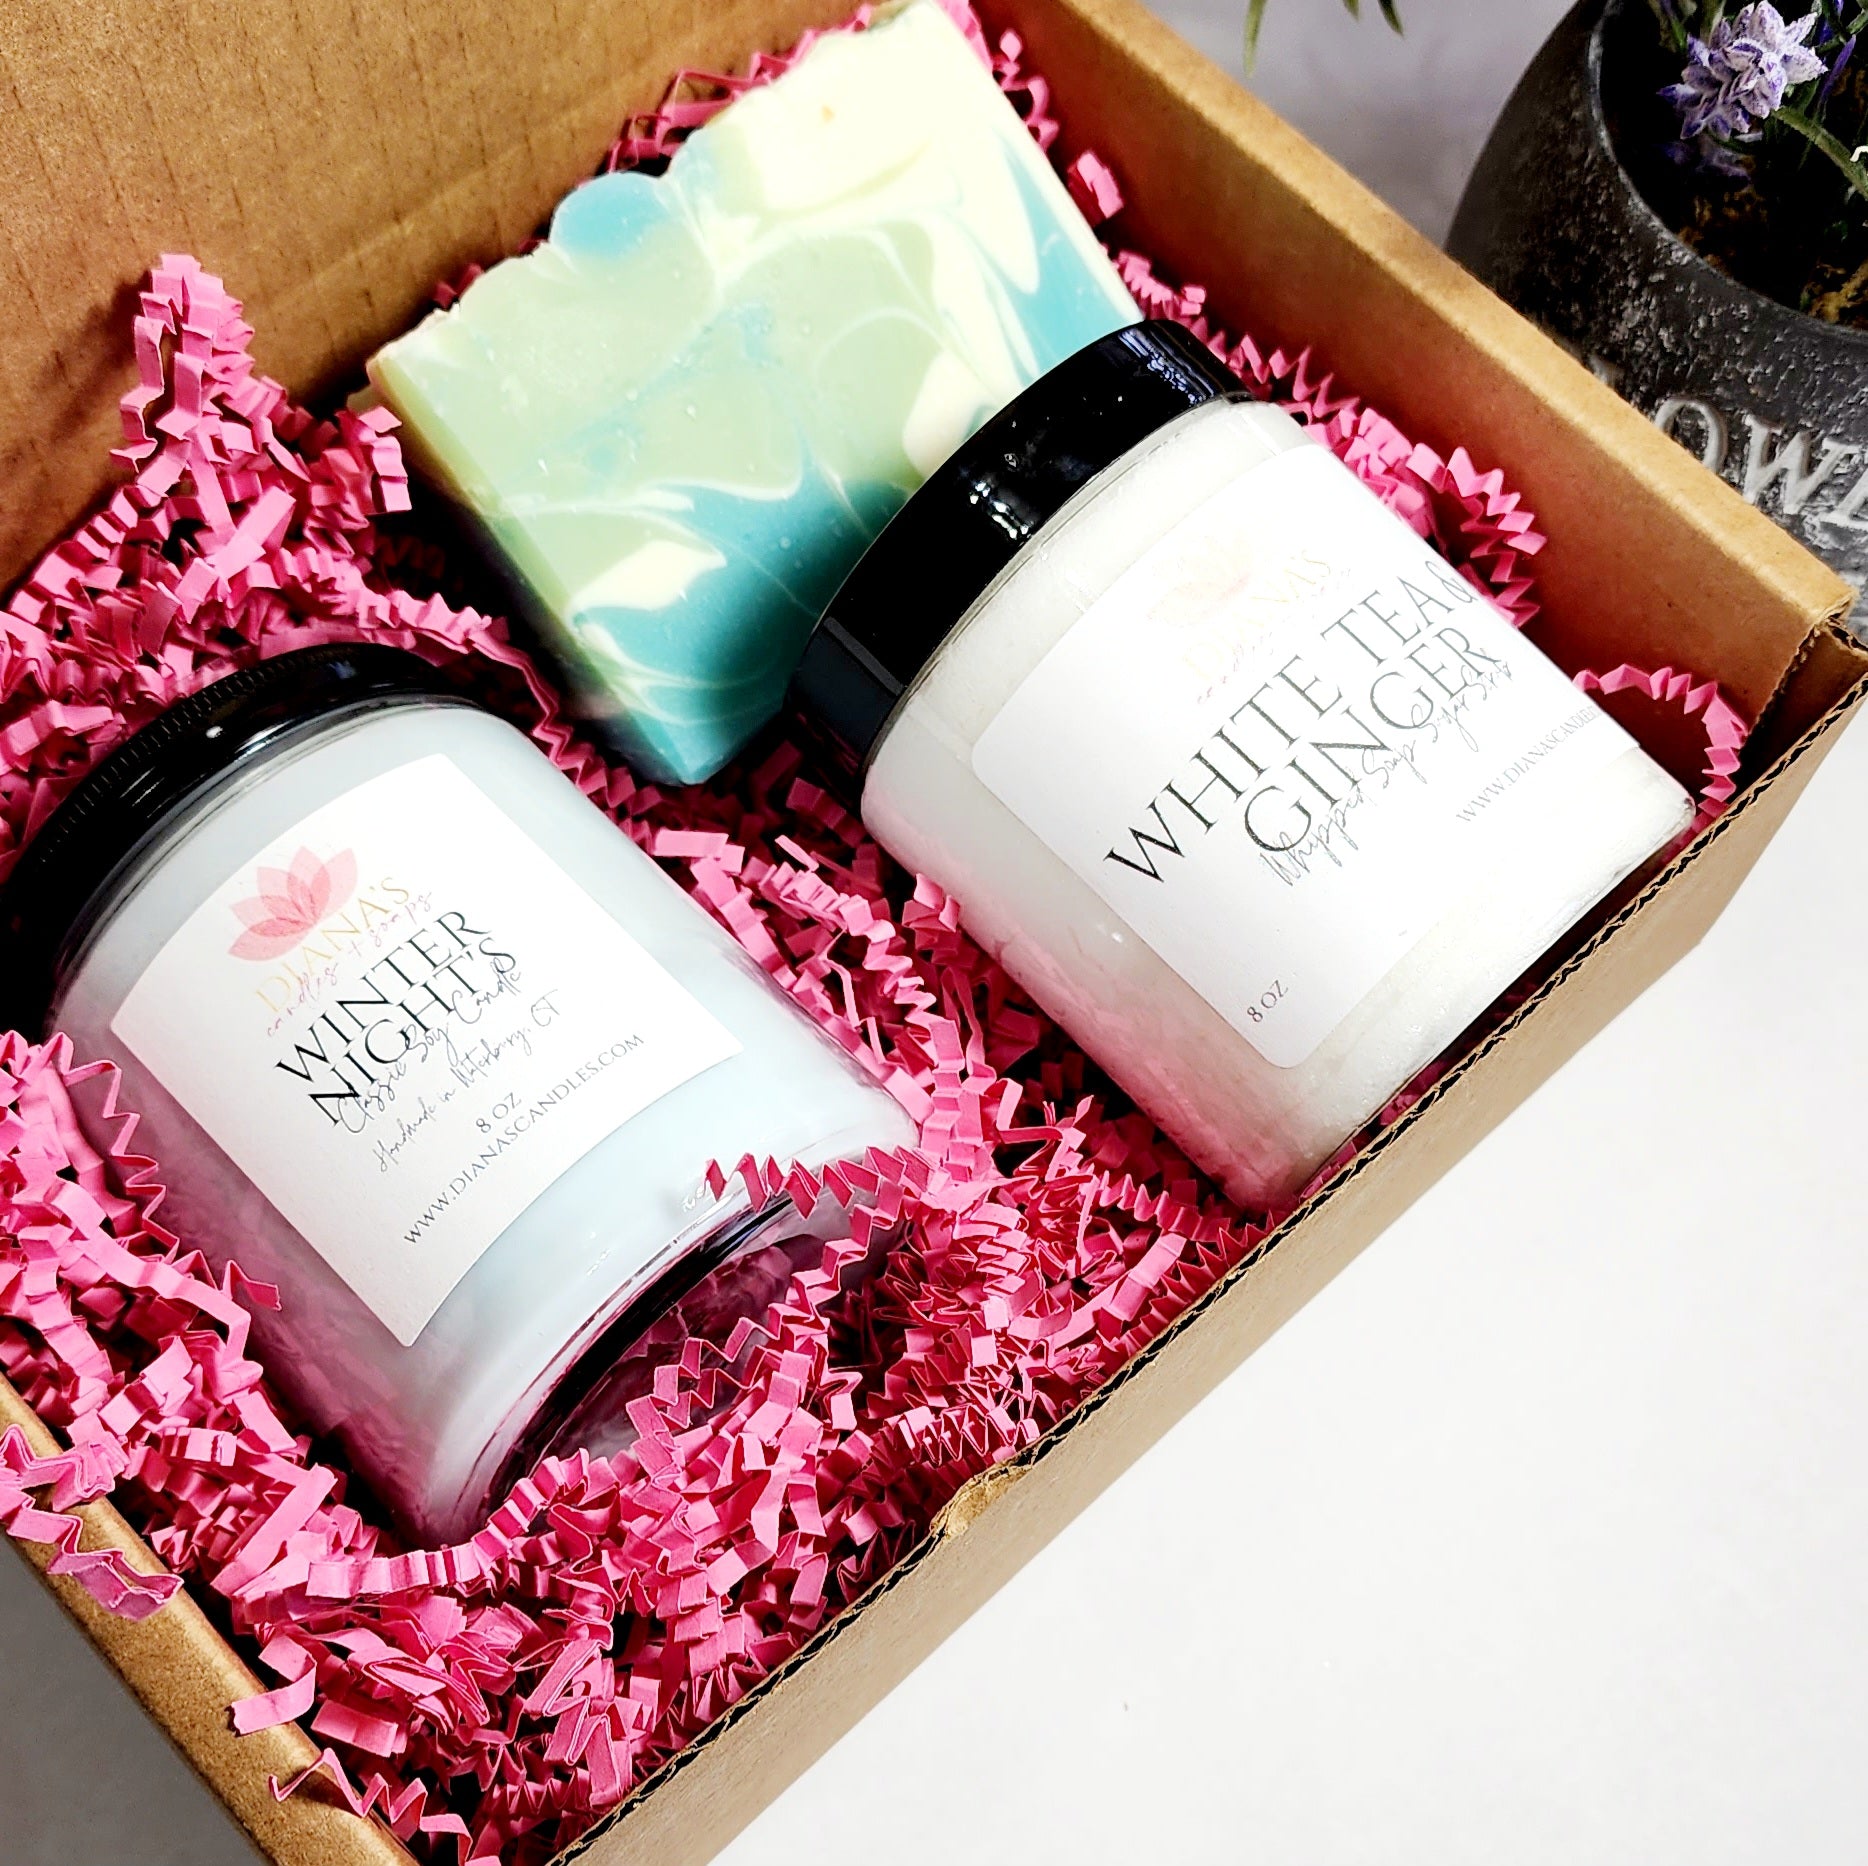 Monthly Subscription Box Diana's Candles and Soaps 